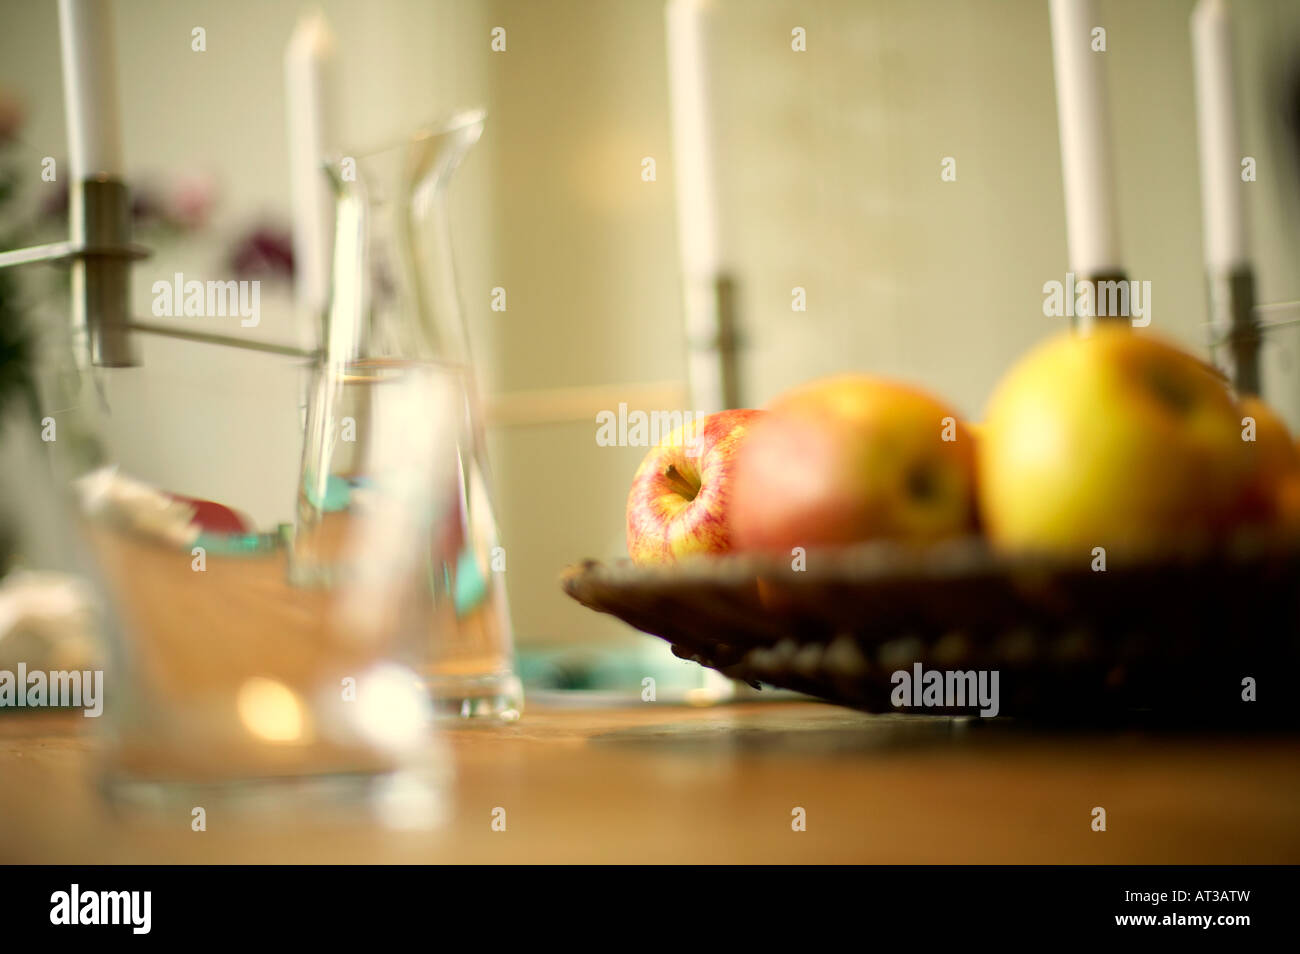 Glasses and fruit bowl on a table Stock Photo